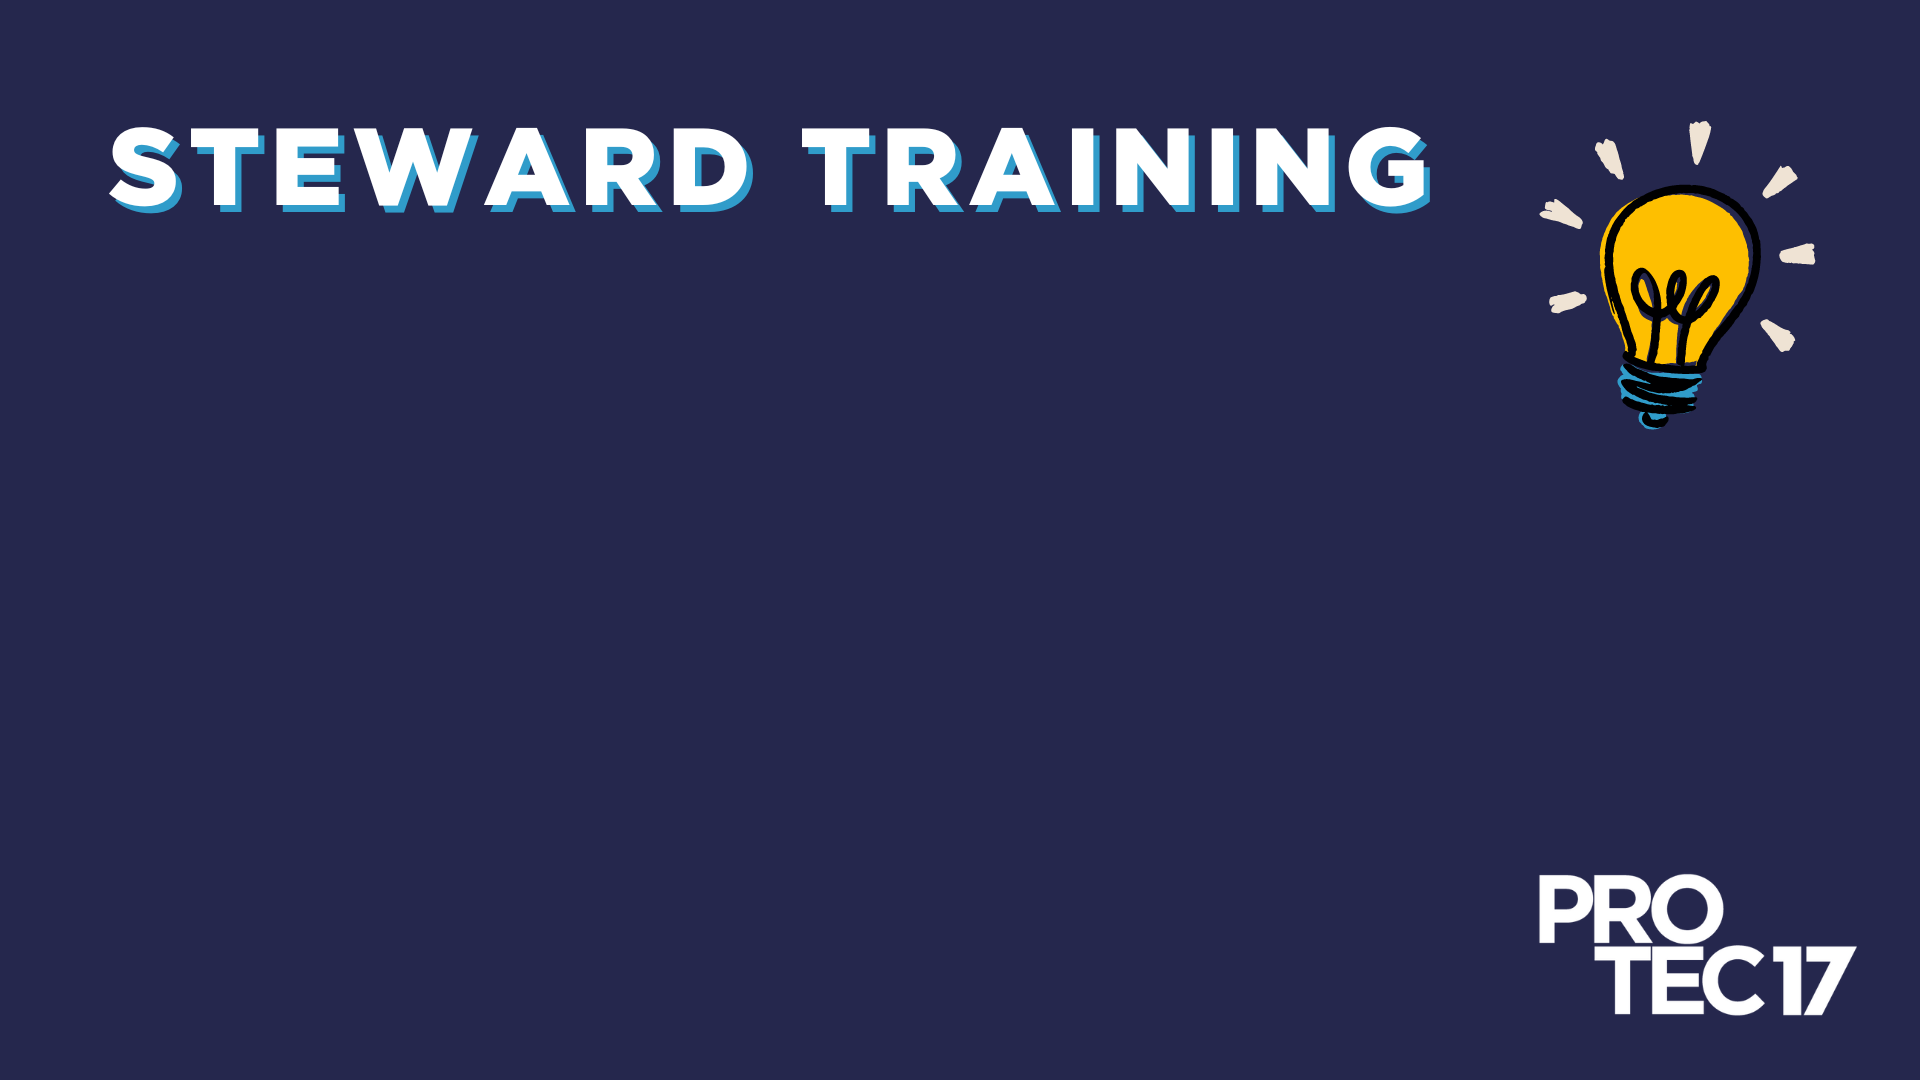 On a dark blue background, white text with a blue shadow reads, "STEWARD TRAINING." There is a graphic of a light bulb to the right, with emphasis lines to show that light is emitting from the bulb. The PROTEC17 logo is in the bottom right.